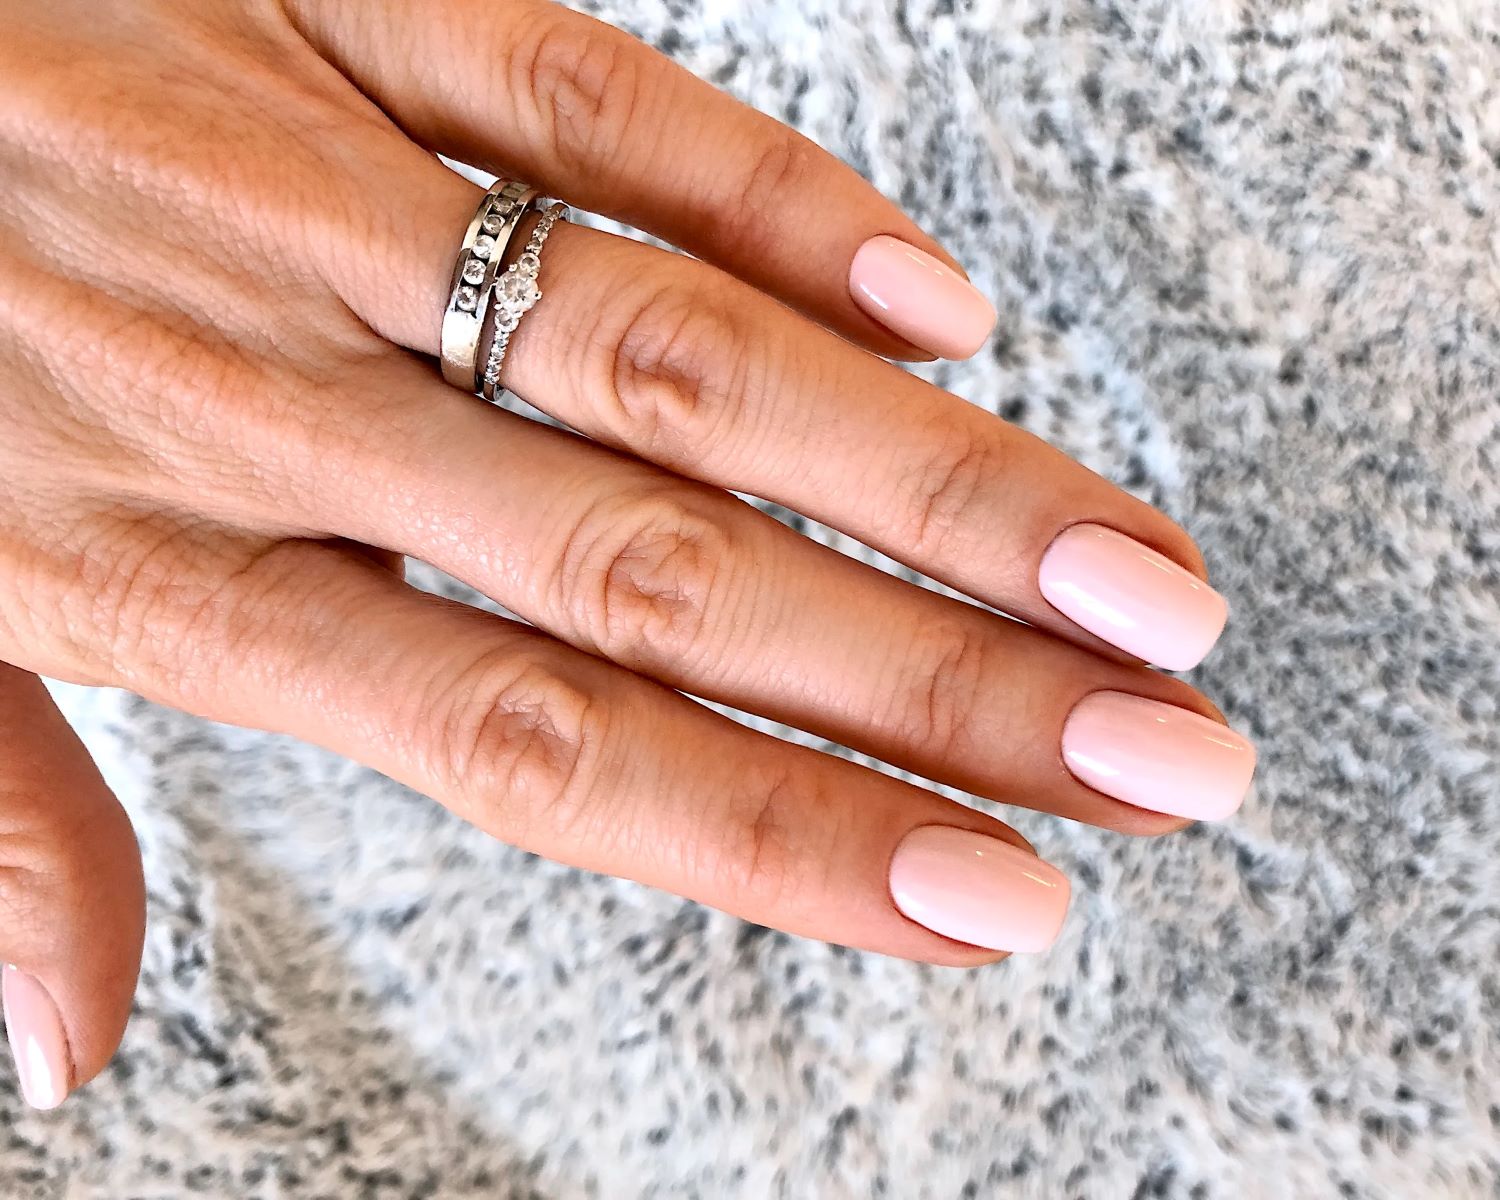 Discover The Hottest Nail Shape Trend For Summer!